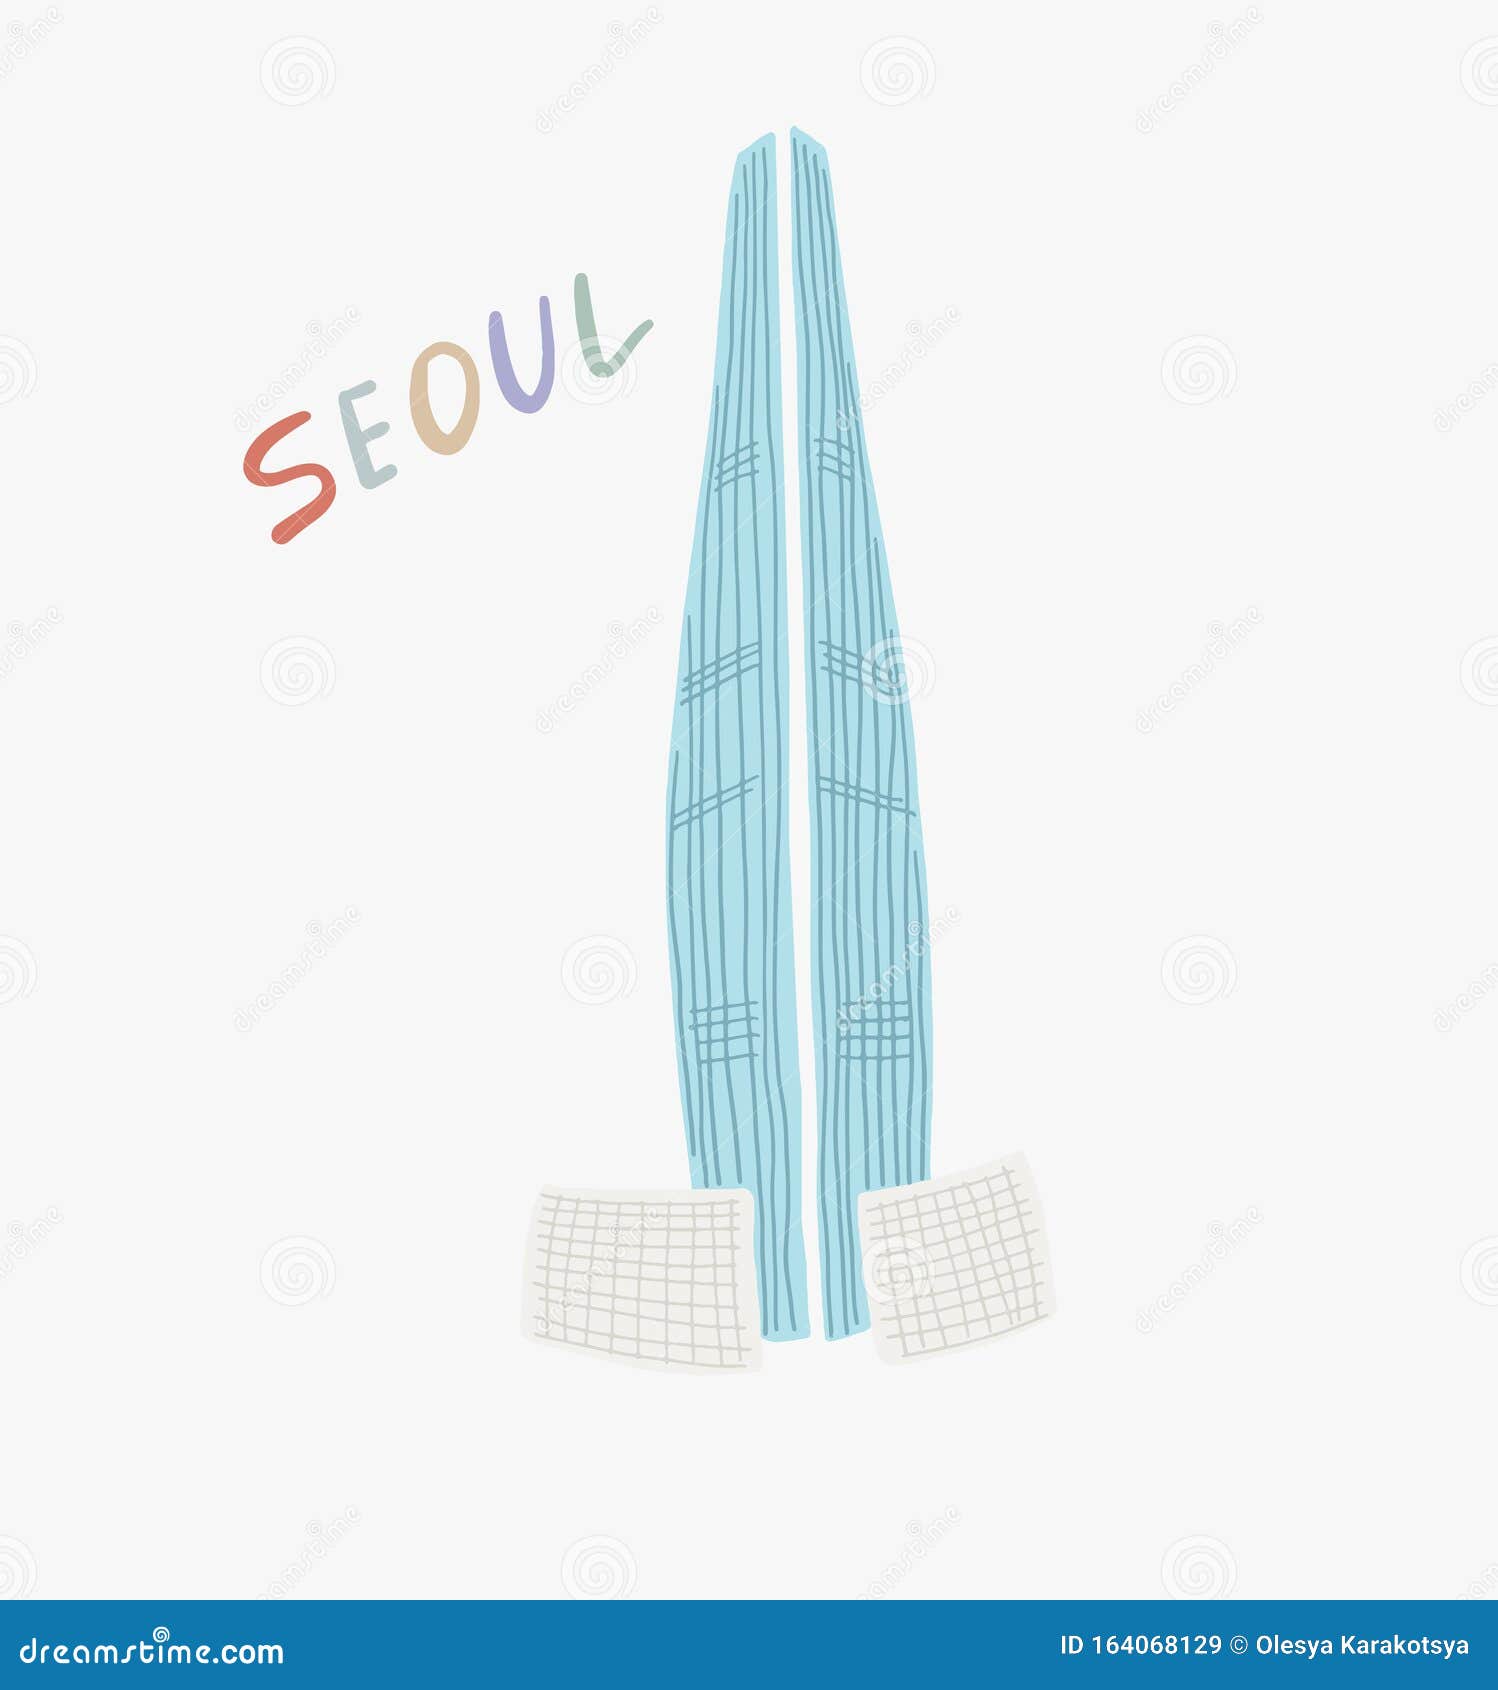  of lotte world tower - famous contemporary building in seoul